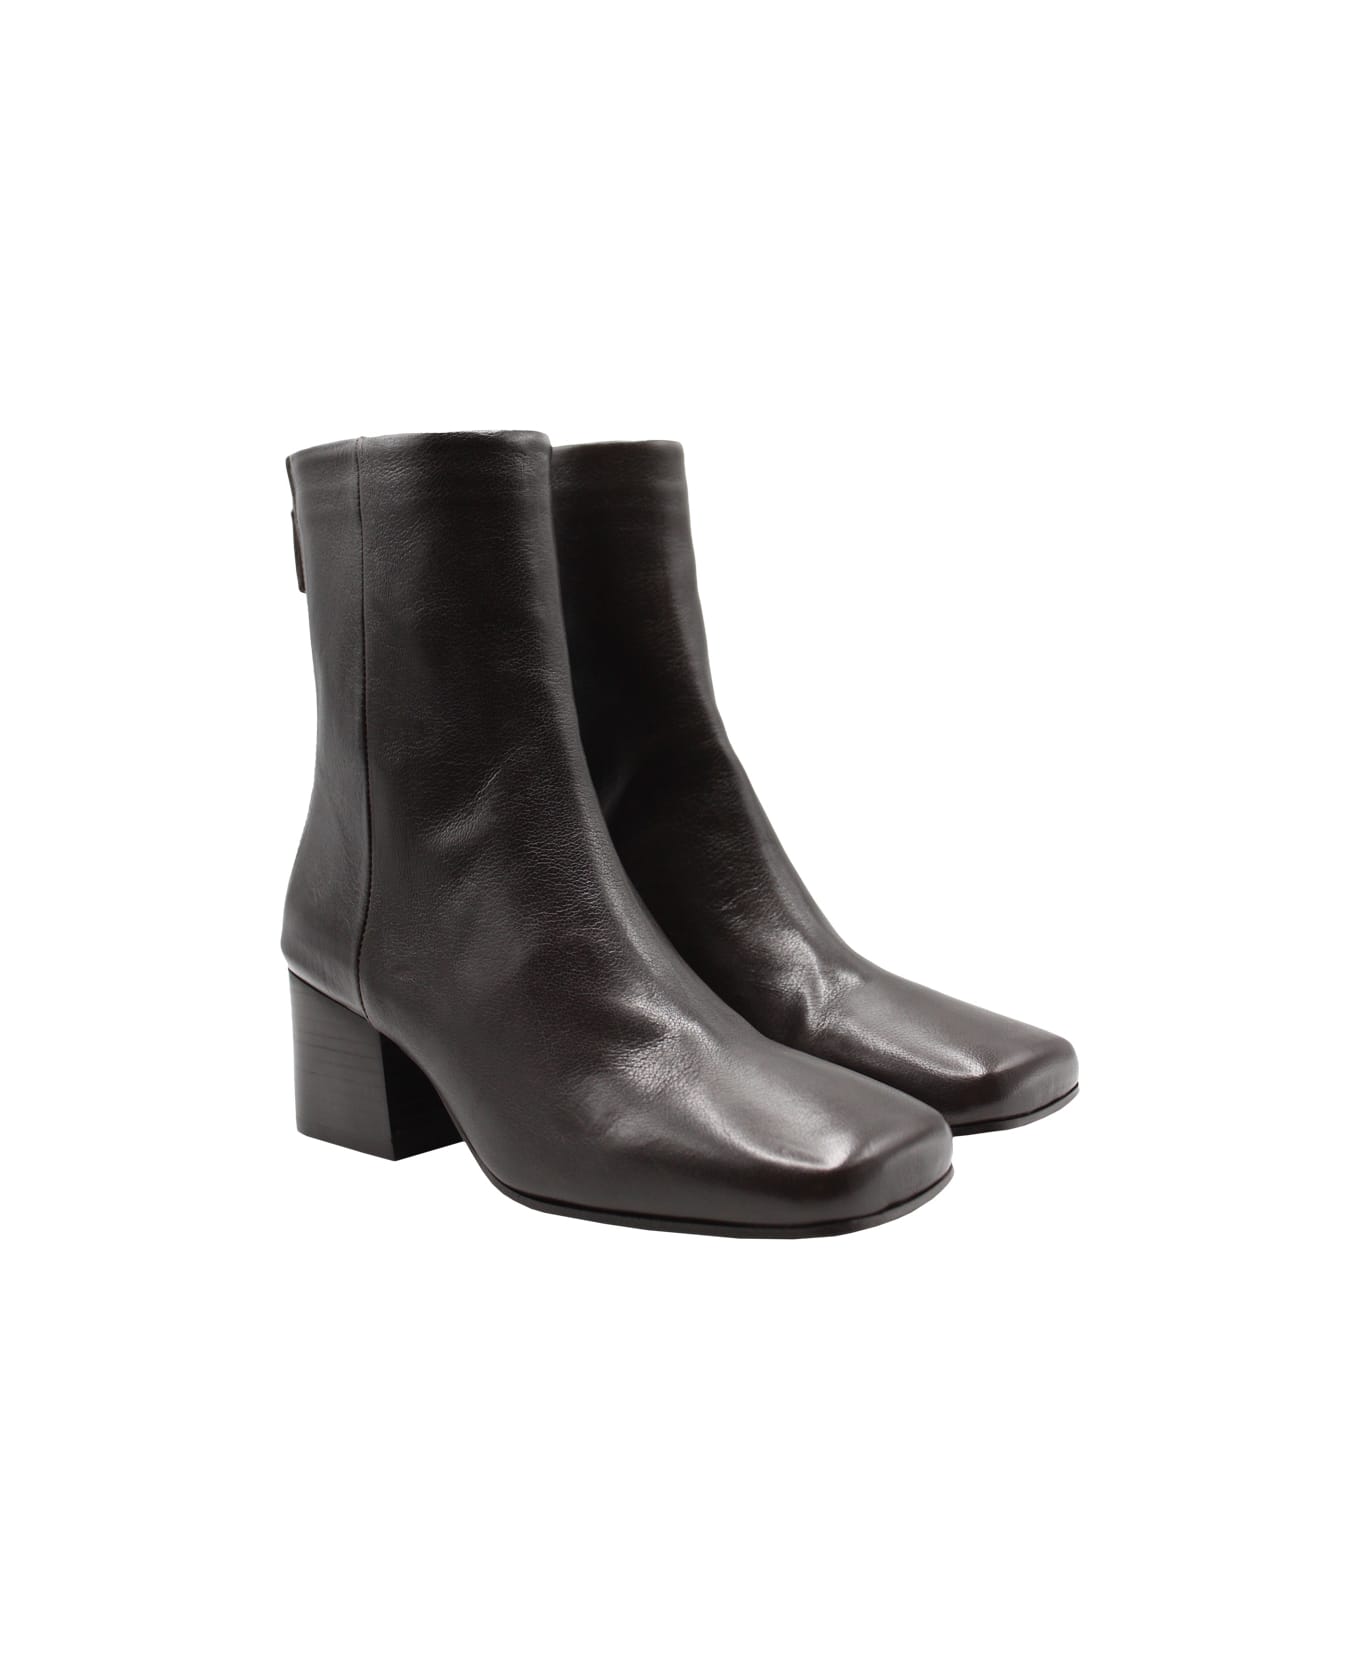 Lemaire Soft Boots 55 - Dark Chocolate